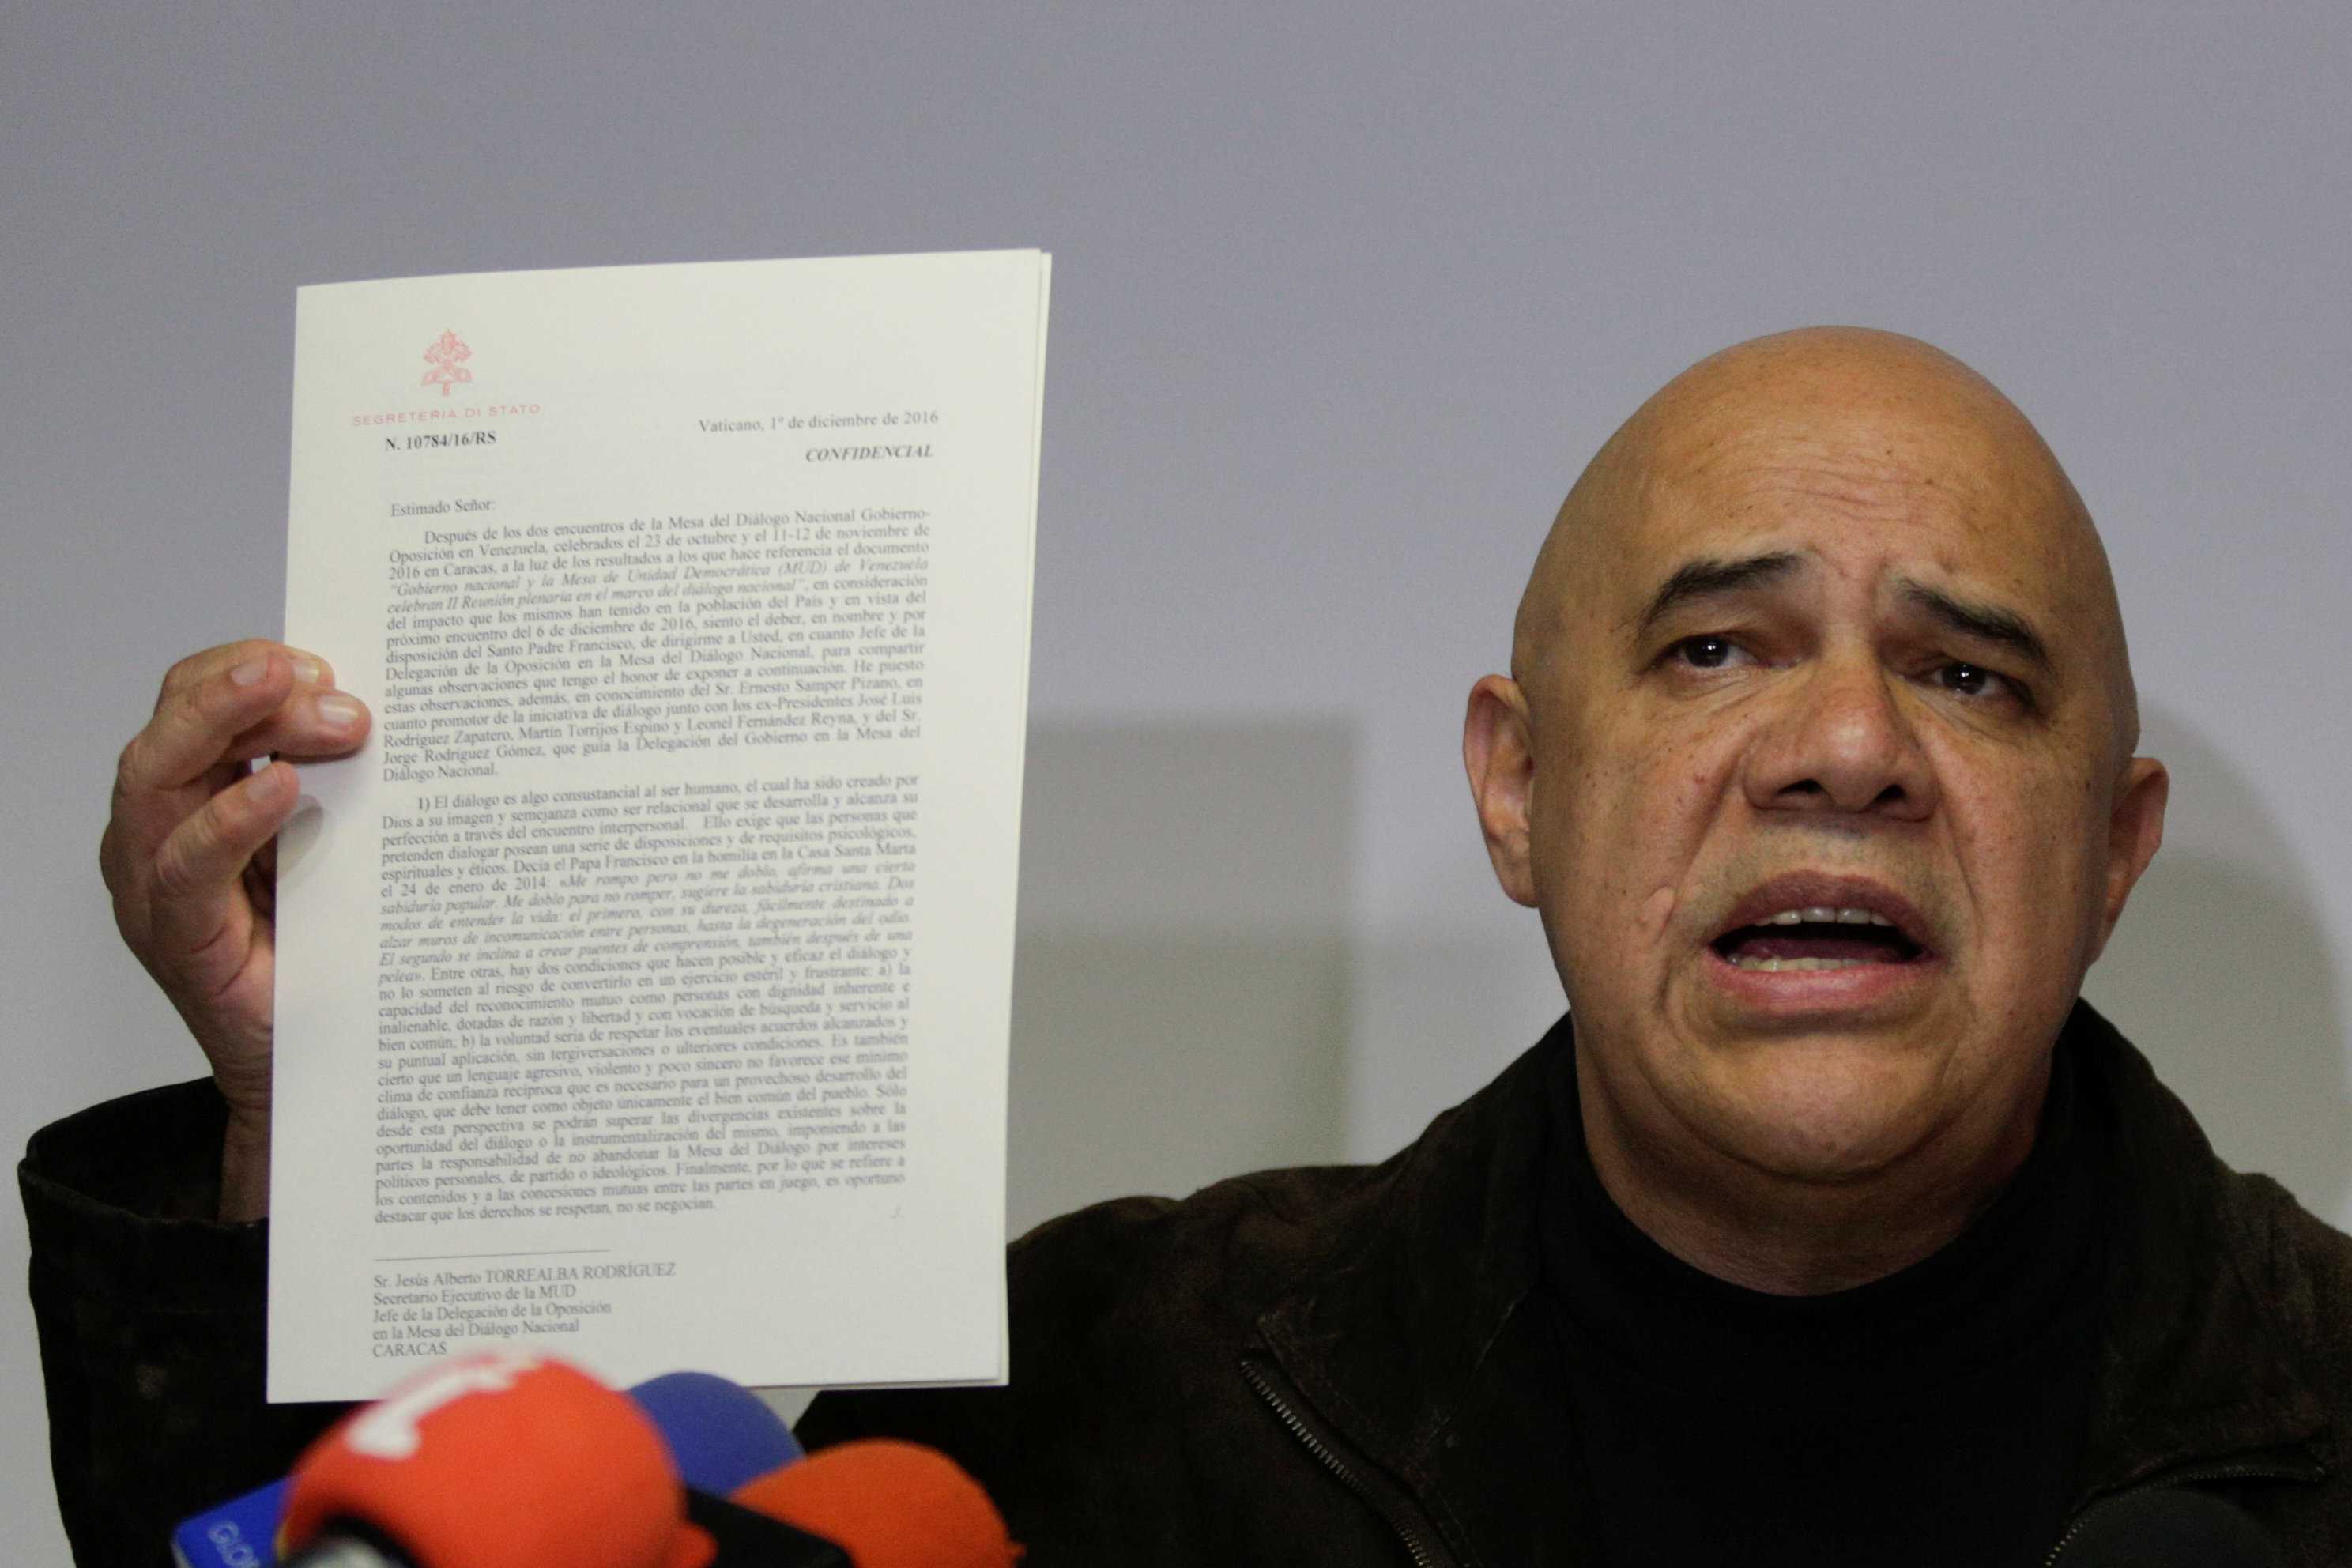 Jesus Torrealba, secretary of the MUD, holds a letter from Vatican Secretary of State Cardinal Pietro Parolin as he talks to the media during a news conference in Caracas